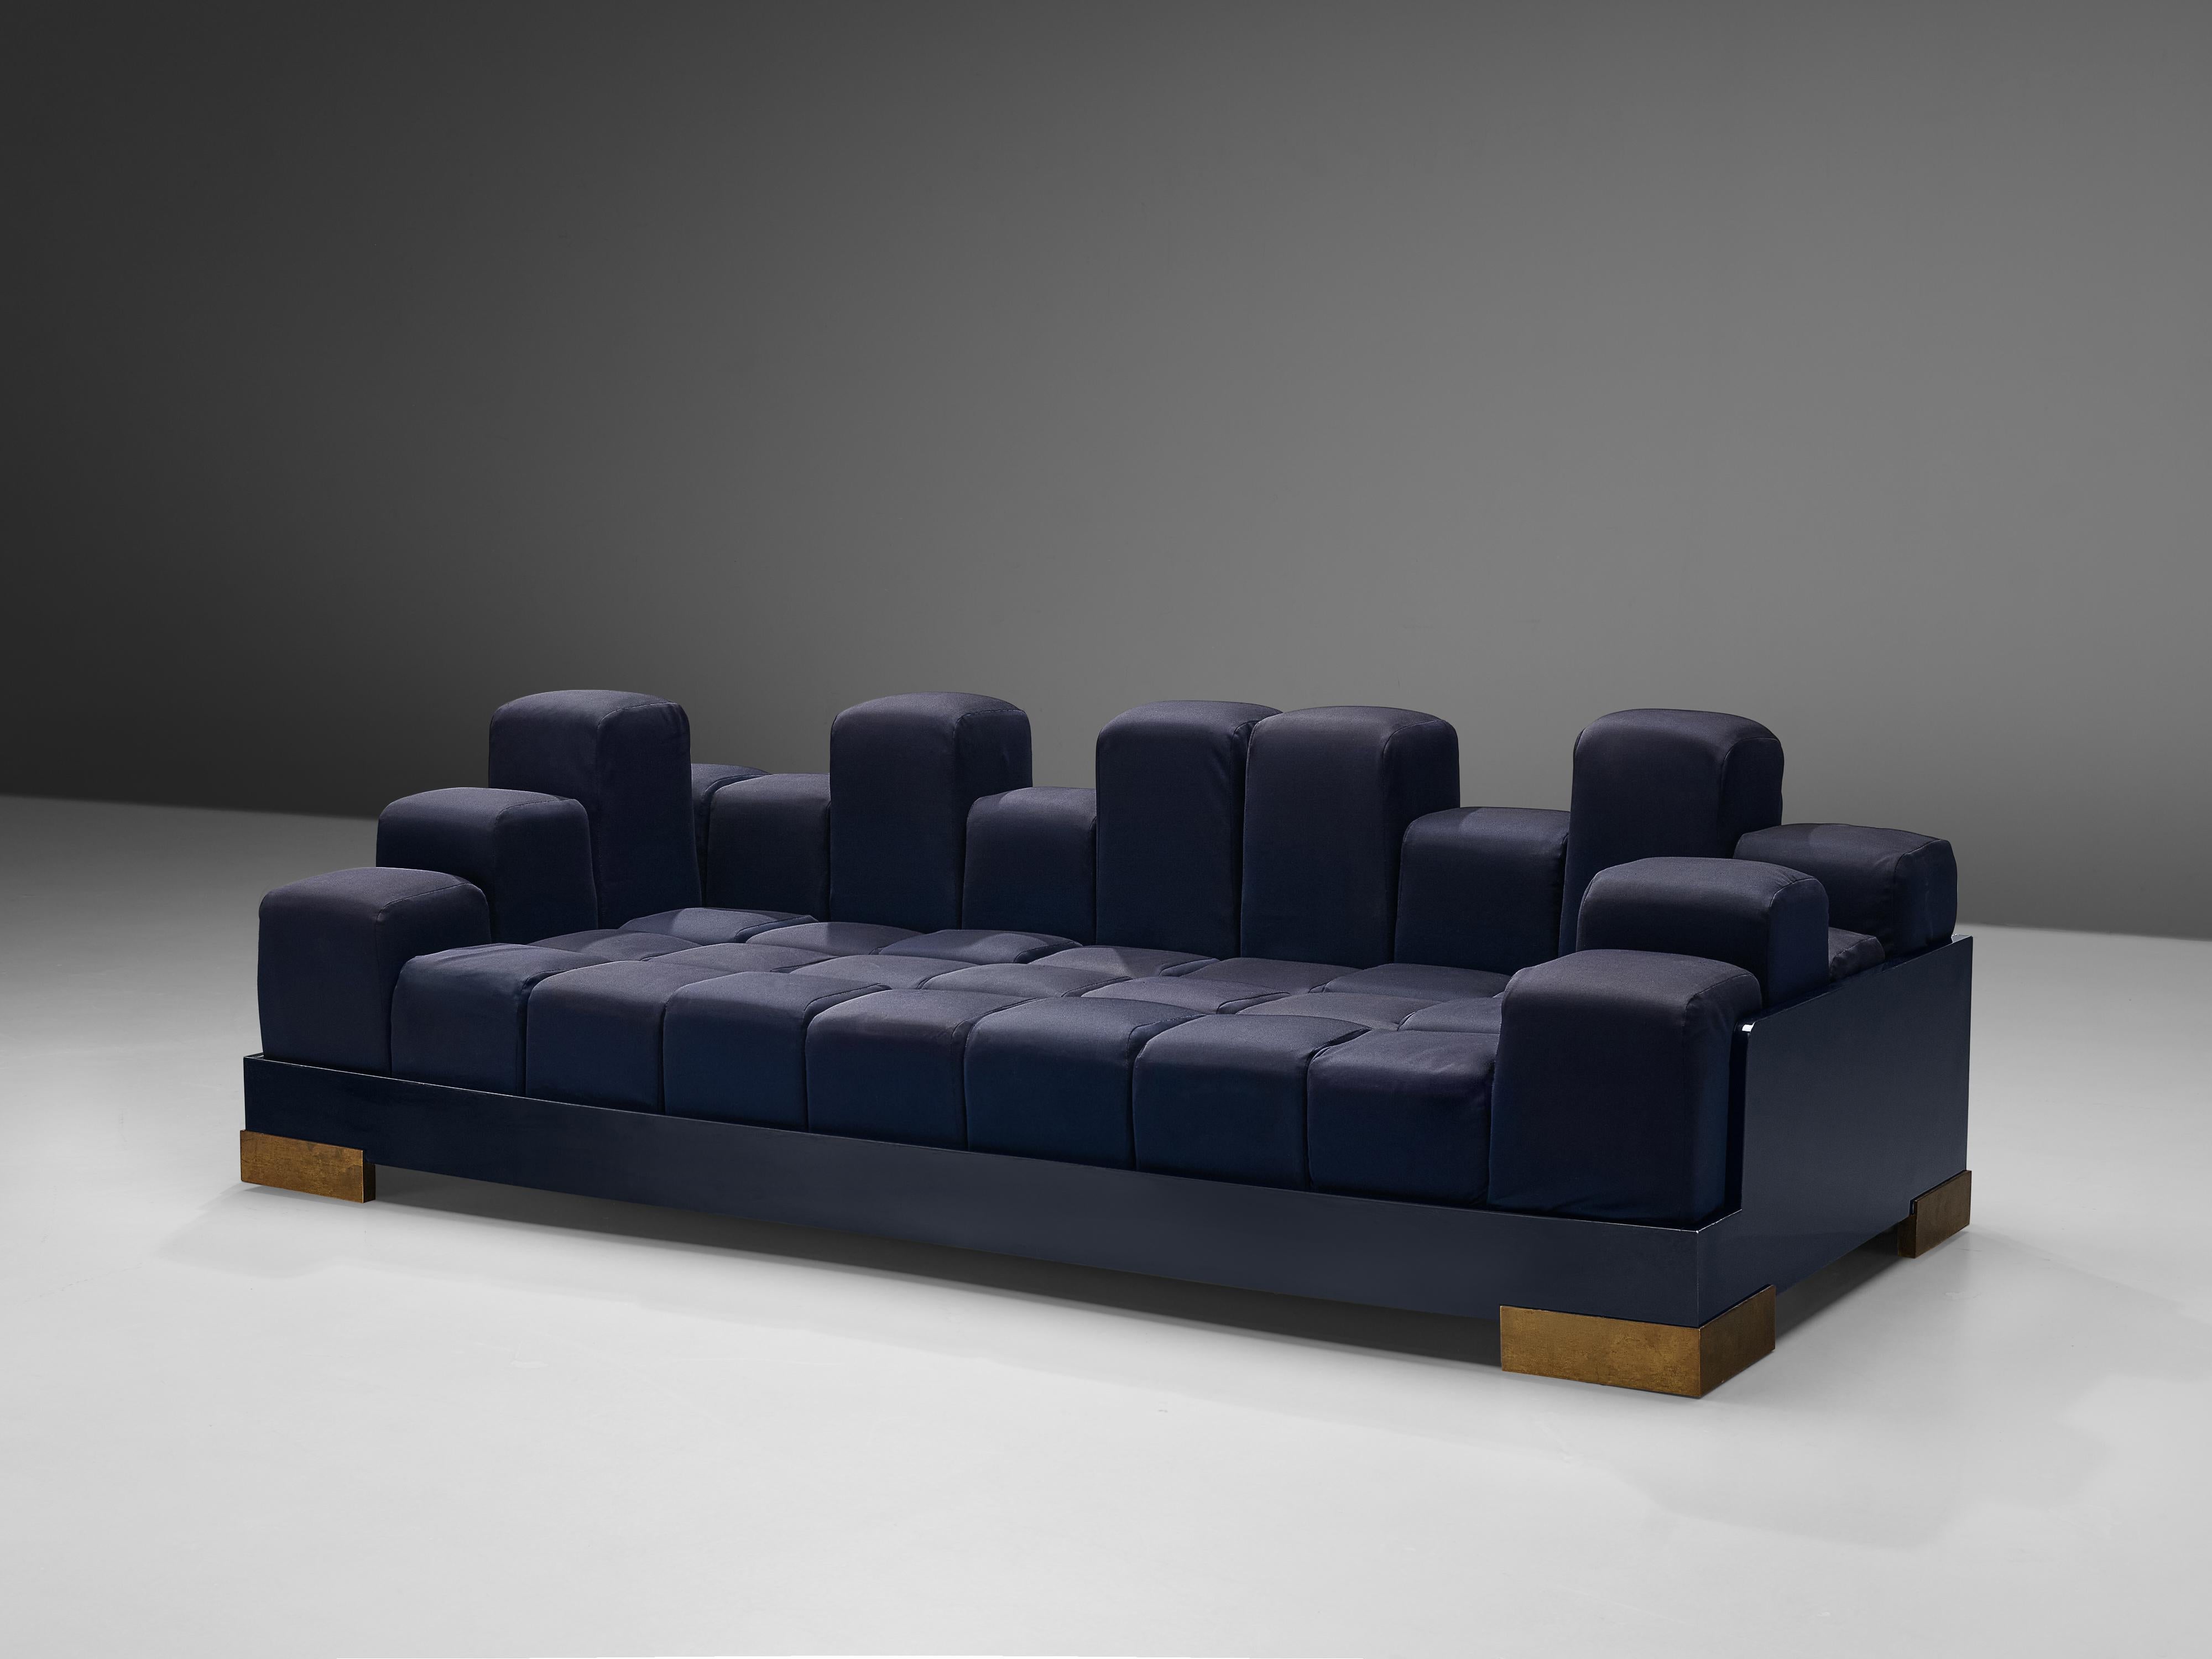 Modular sofa, blue upholstery, wood, brass, Italy, 1980s

Rare Italian sofa consisting of multiple cubes in a wooden frame. Both the seat and the surrounding frame are built of multiple cubes. A playful detail is the fact that he surrounding